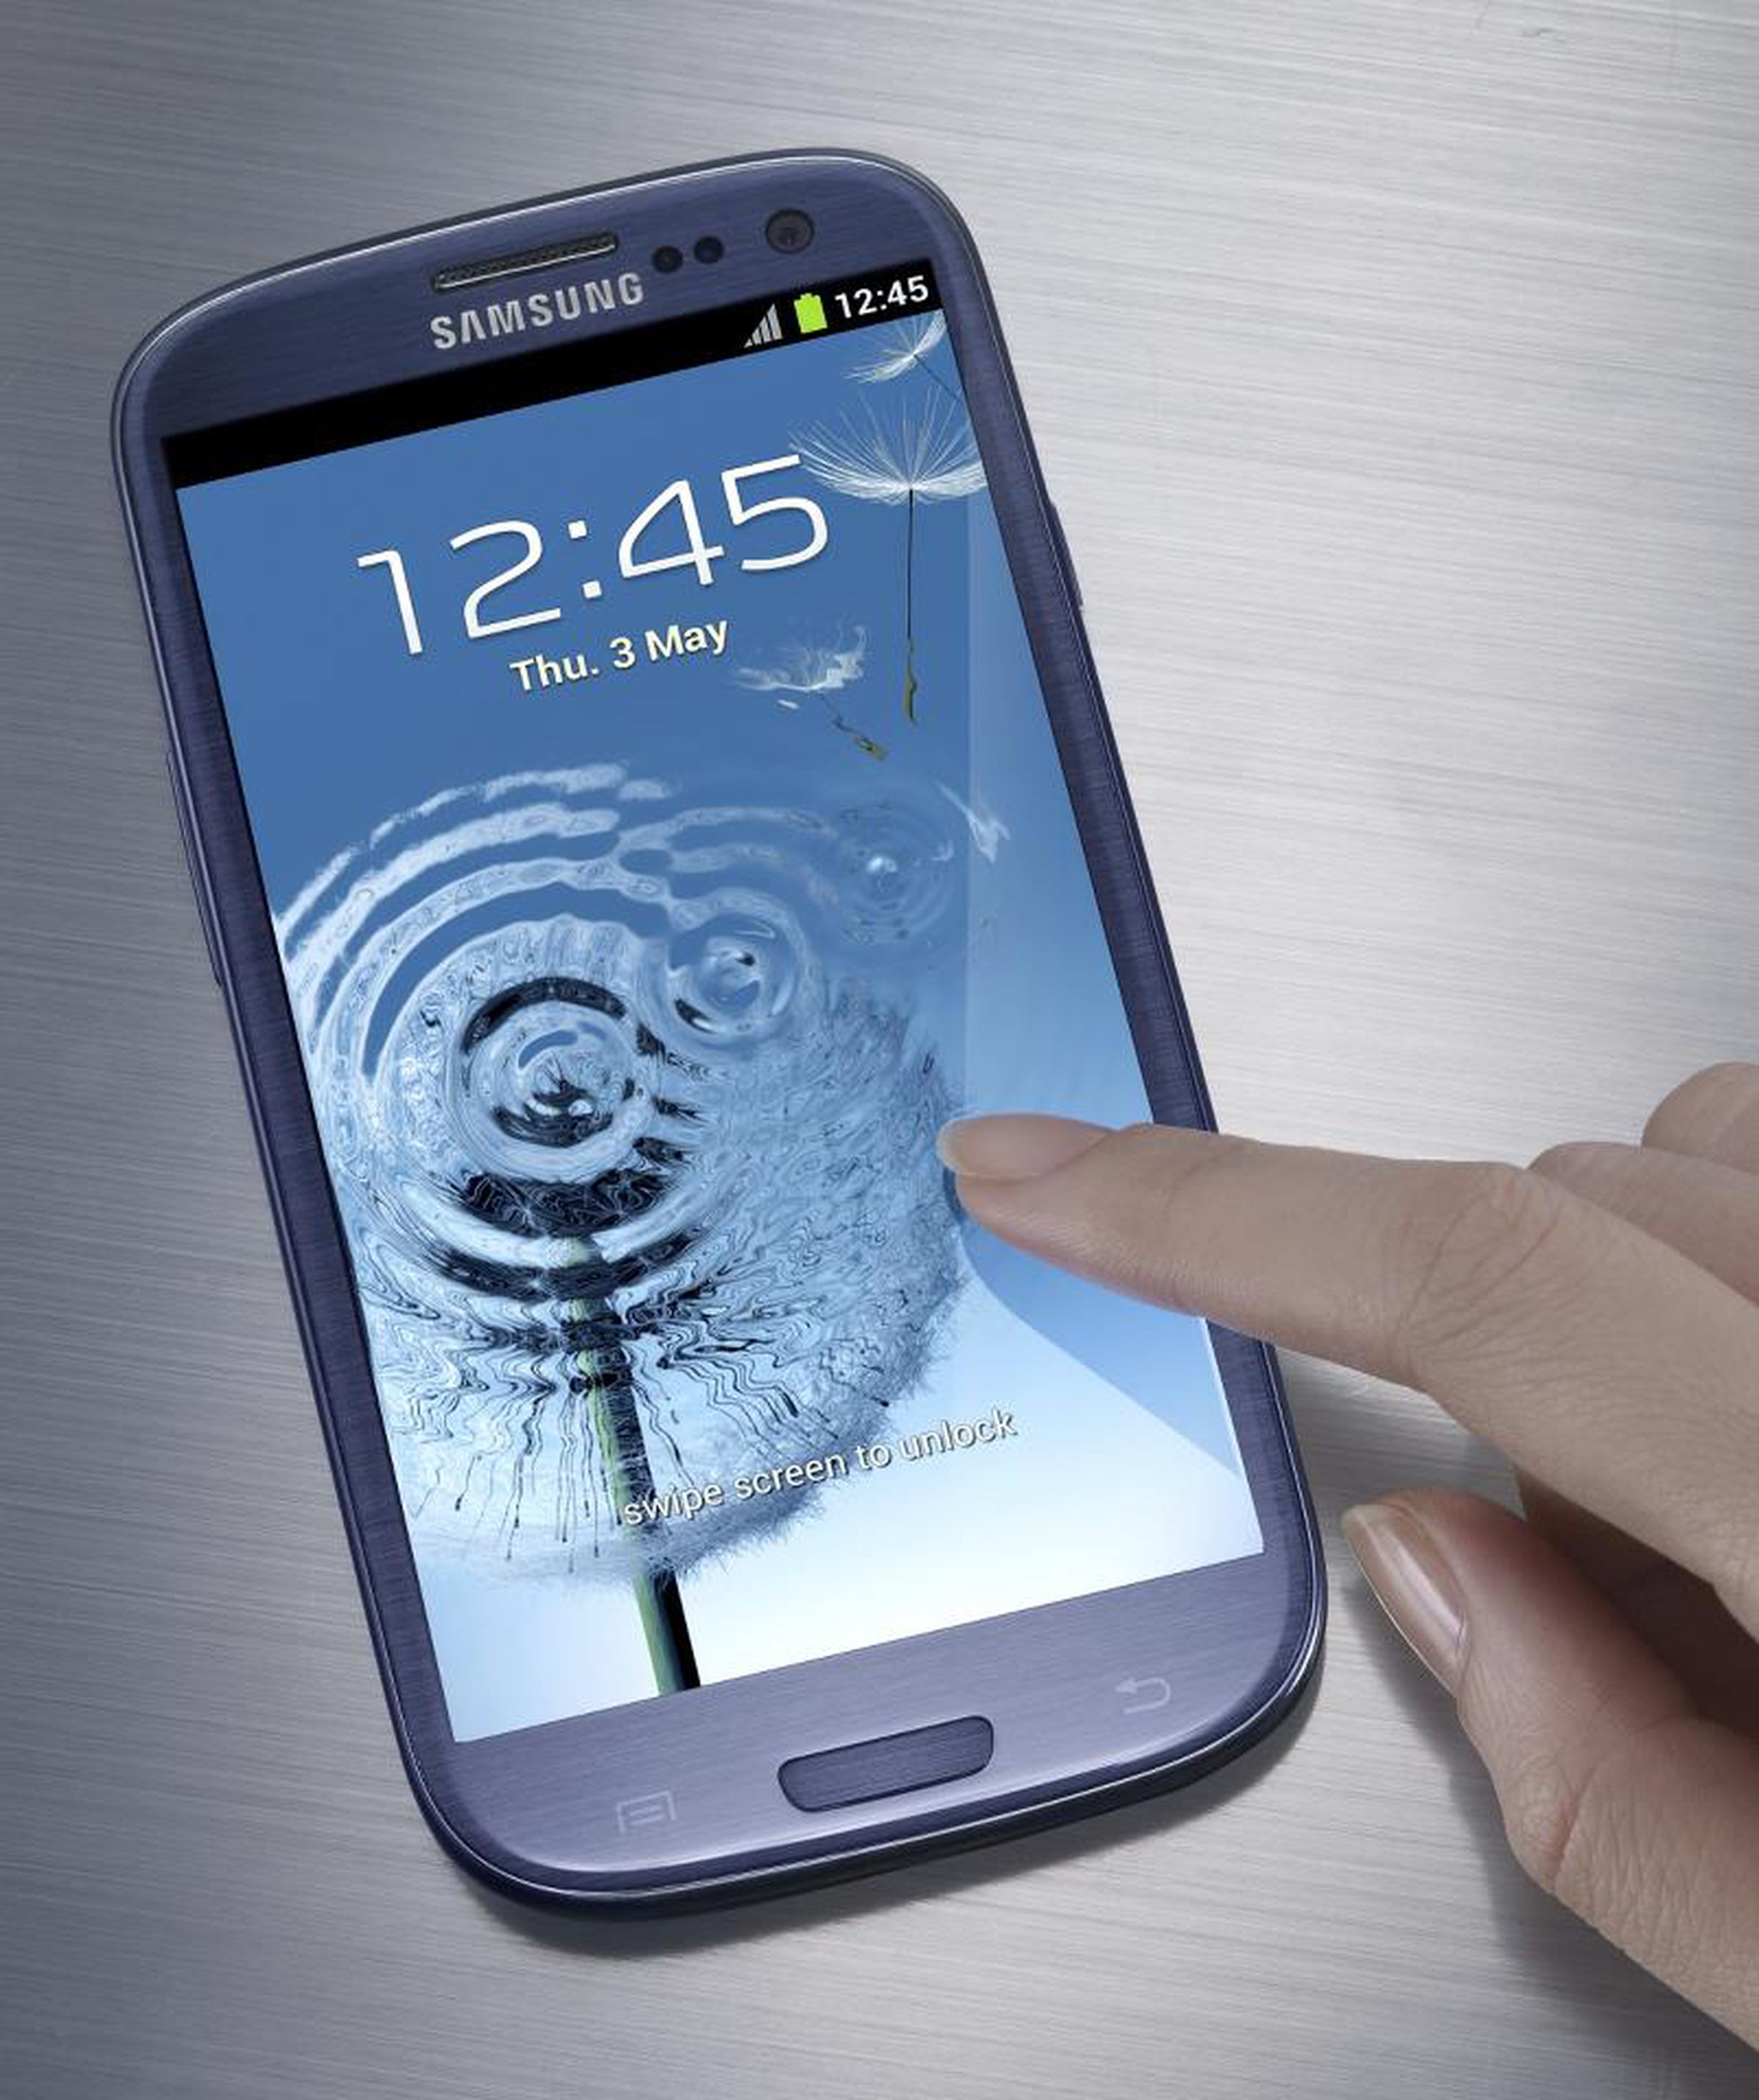 Samsung Galaxy S III press pictures 